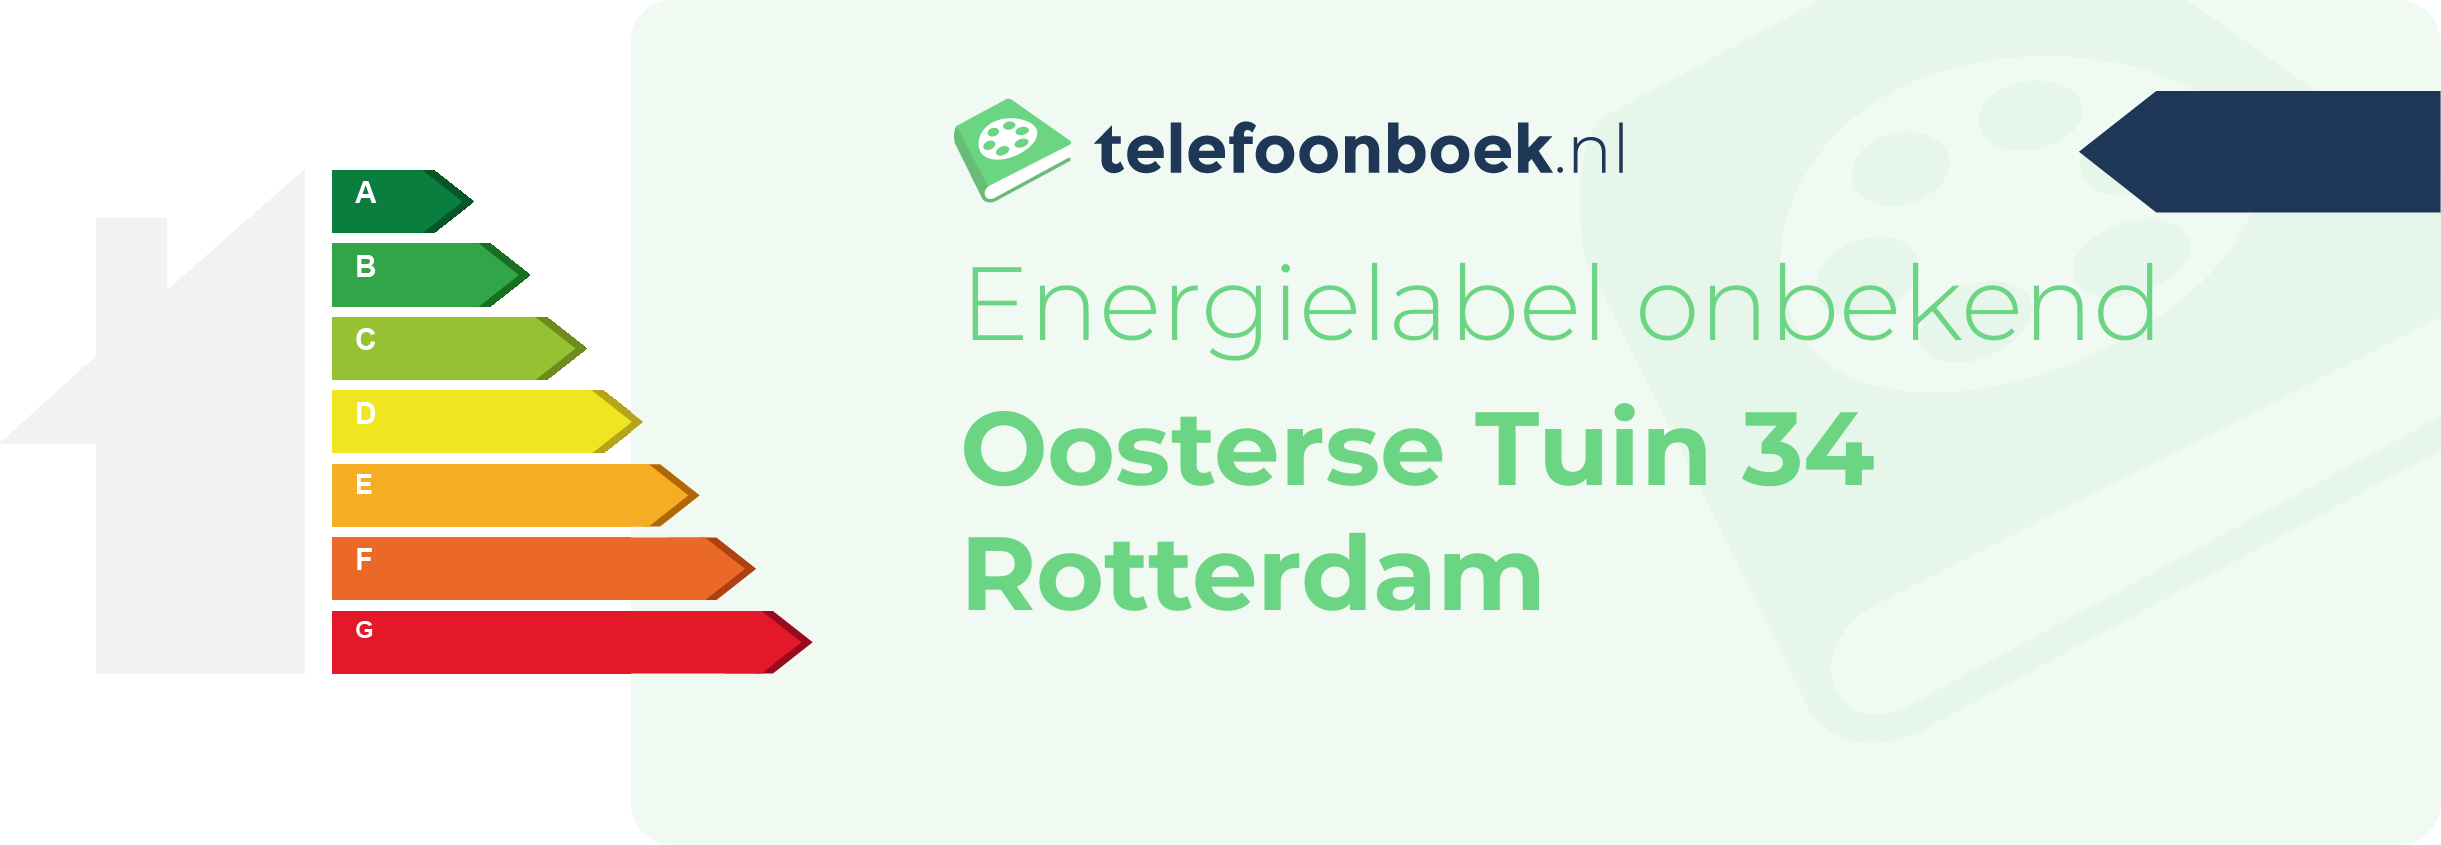 Energielabel Oosterse Tuin 34 Rotterdam